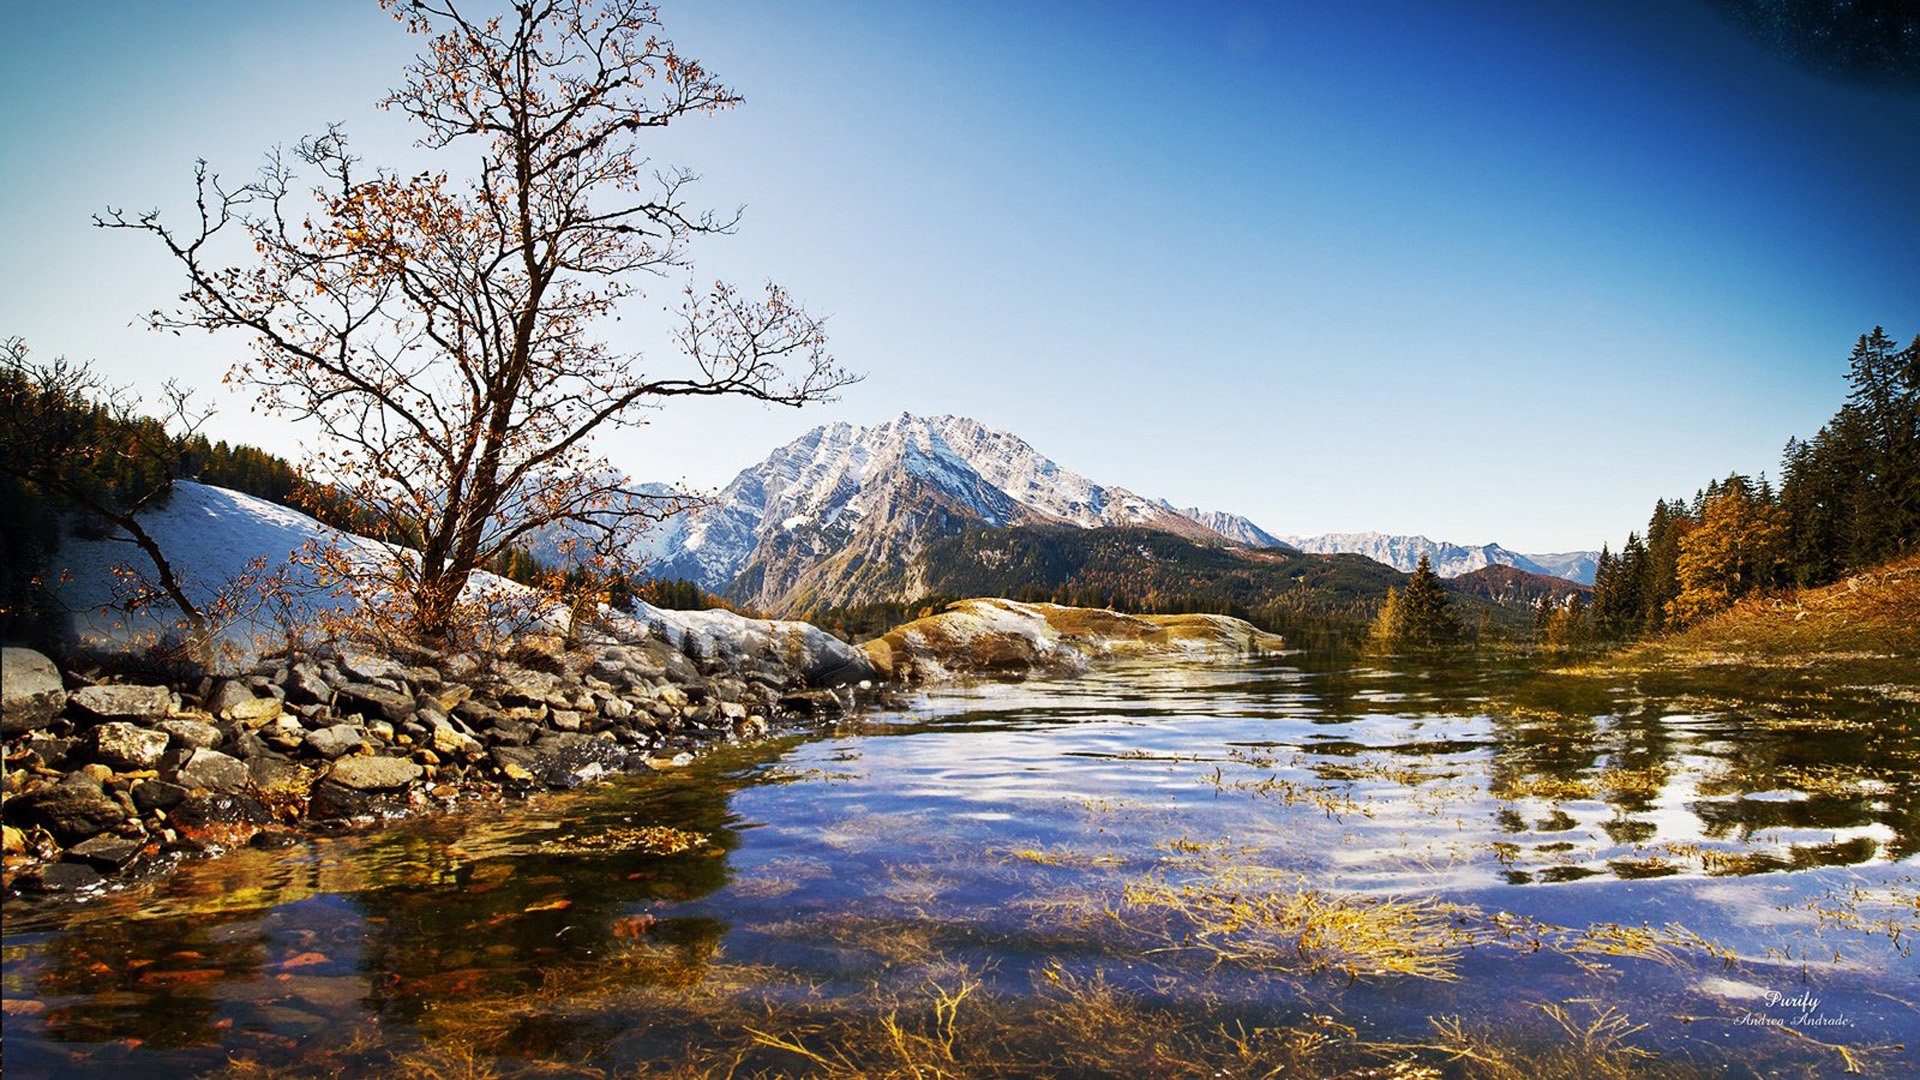 Landscape View Of Snow Capped Peak Mountain Under Blue Sky Autumn Trees Reflection On Lake 2K Nature